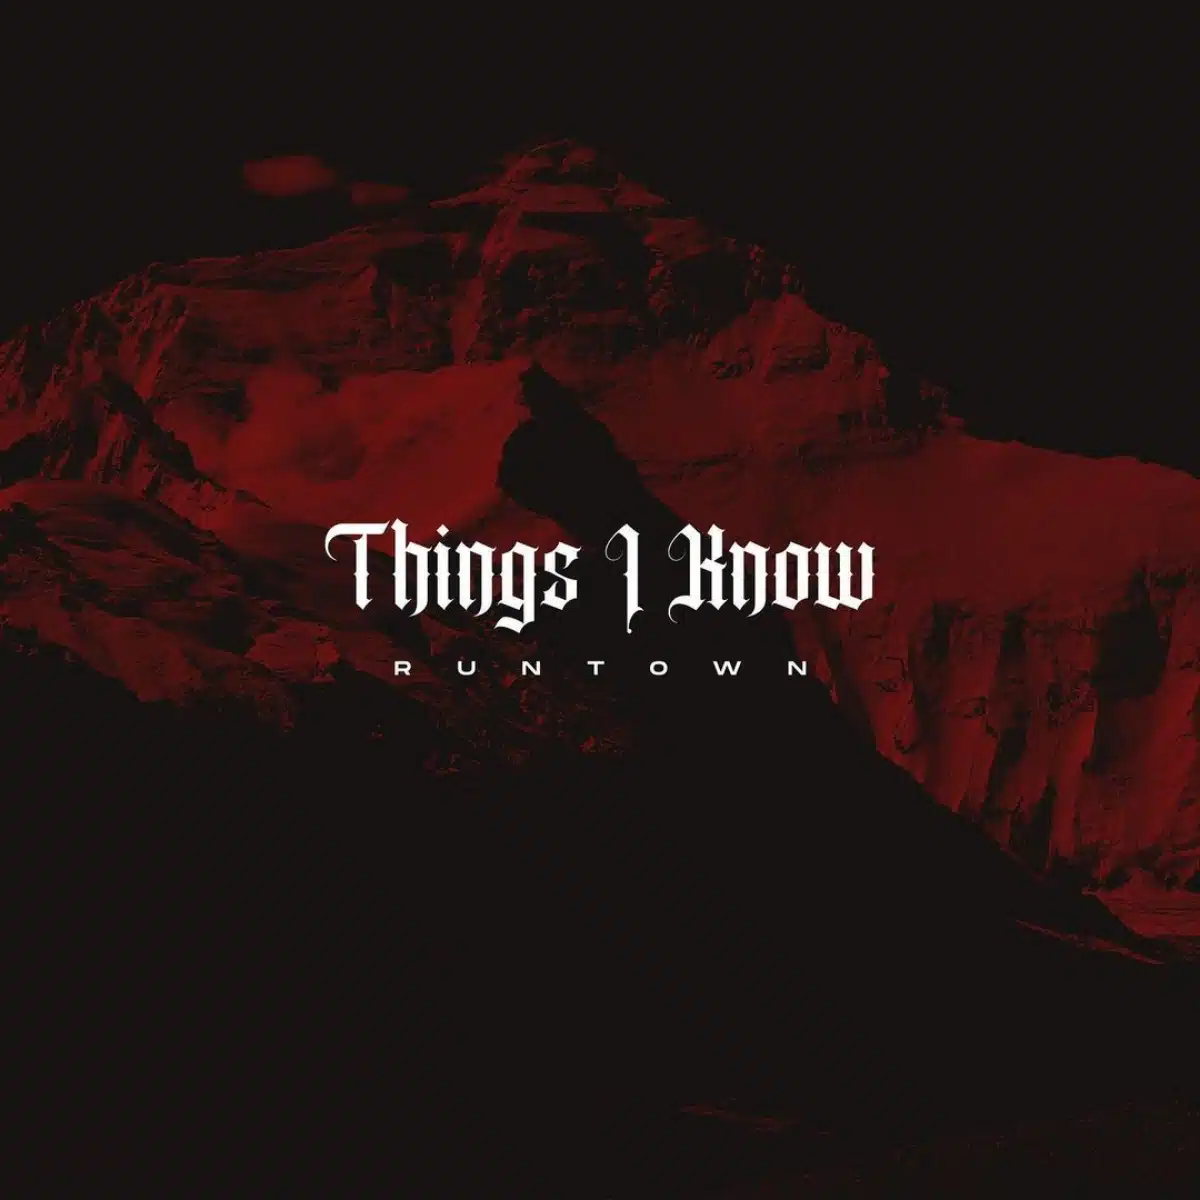 DOWNLOAD: Runtown – “Things I Know” Mp3